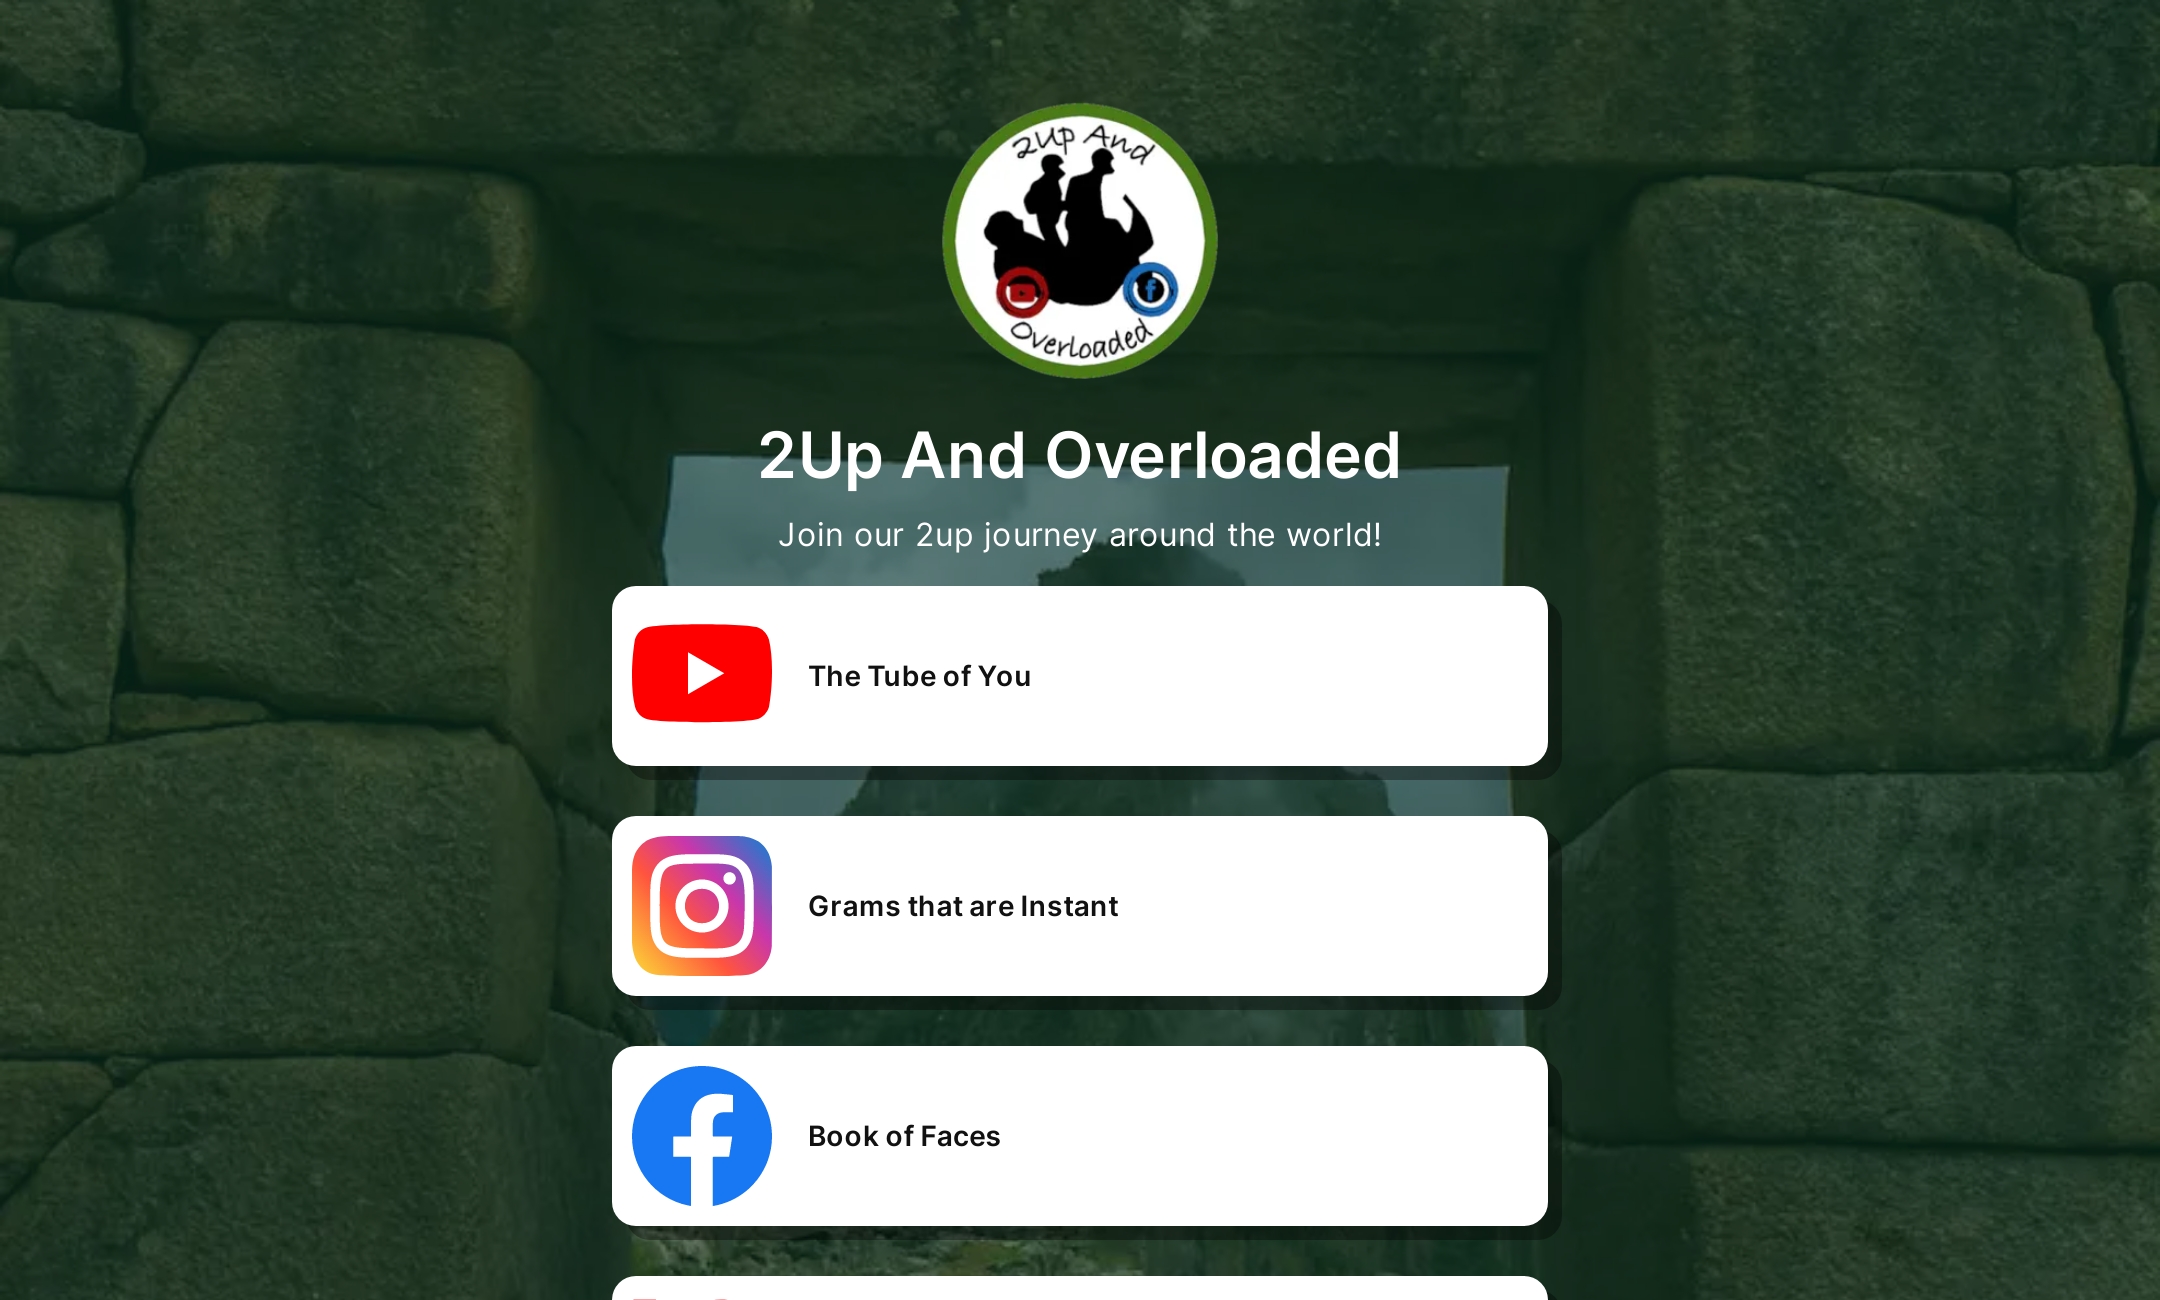 2Up and Overloaded 